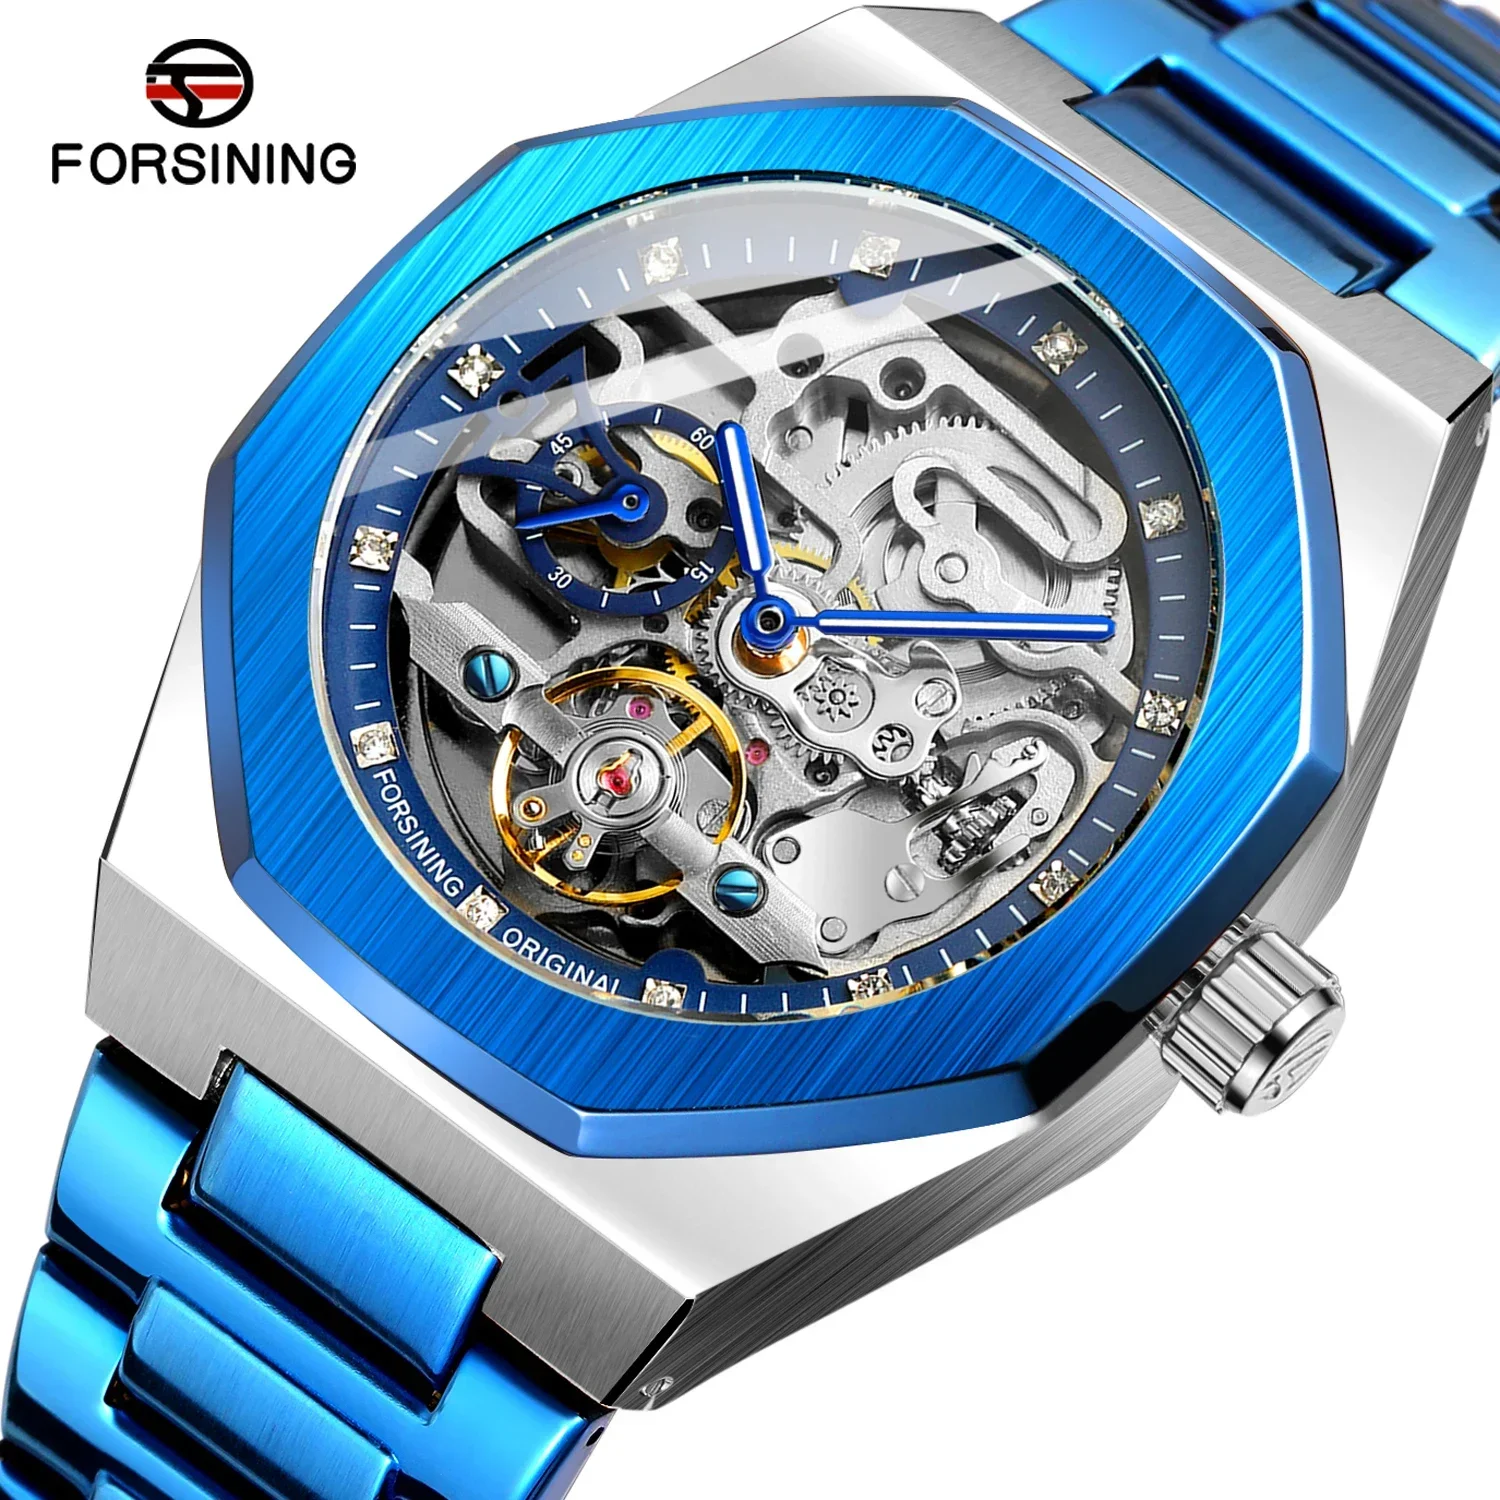 

Forsining Top Brand Stainless Steel Strap Men Automatic Mechanical Watch Business Fashion Wrist Watches for Men montre homme